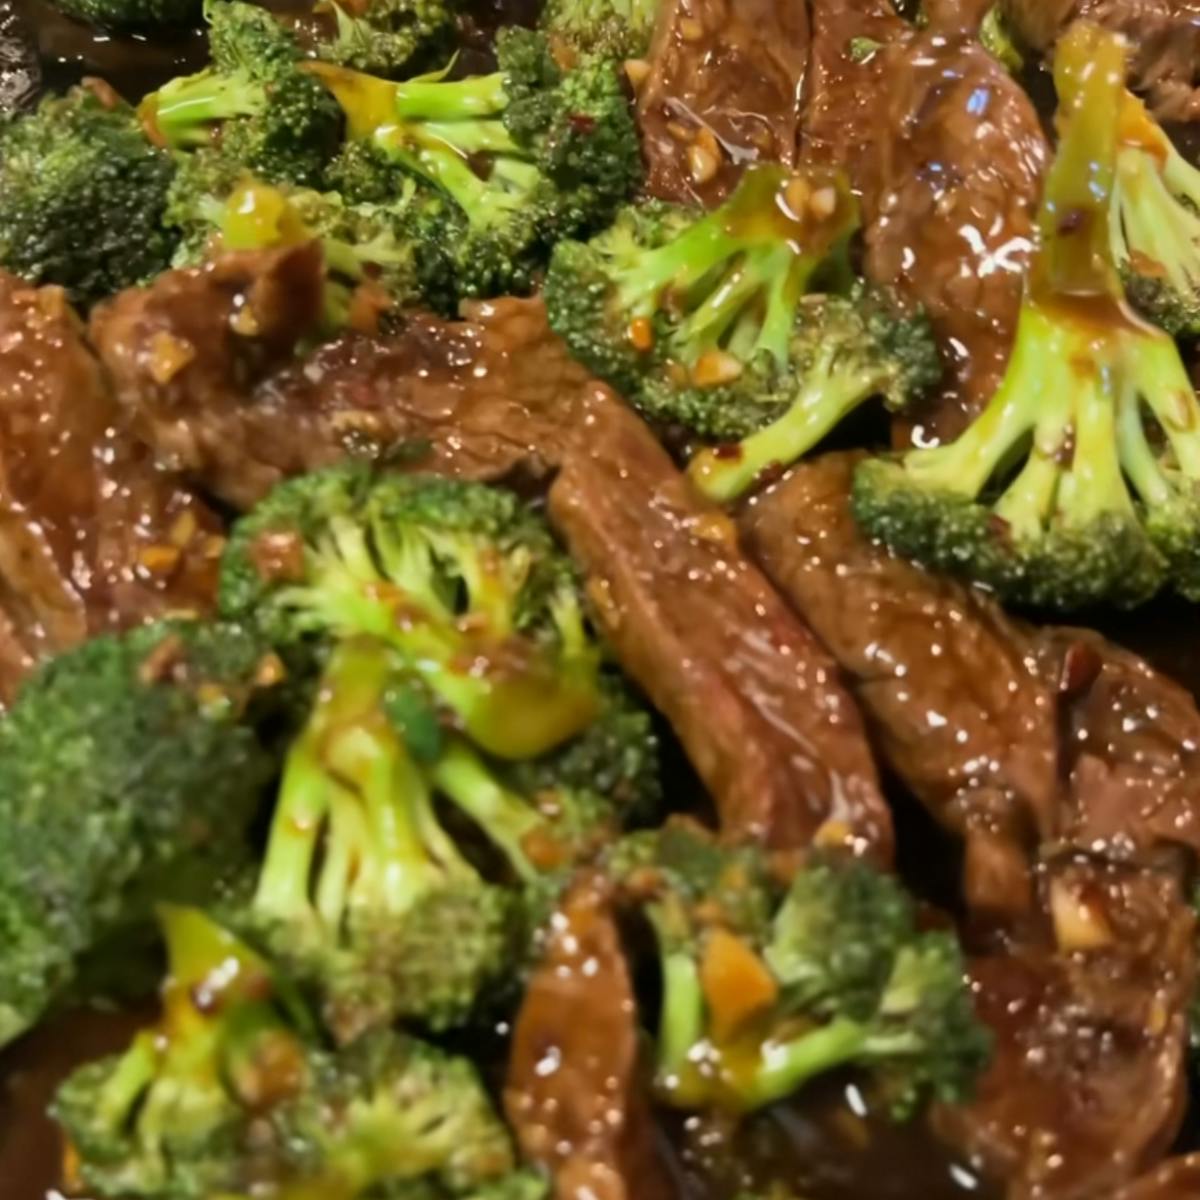 Beef and broccoli cooked